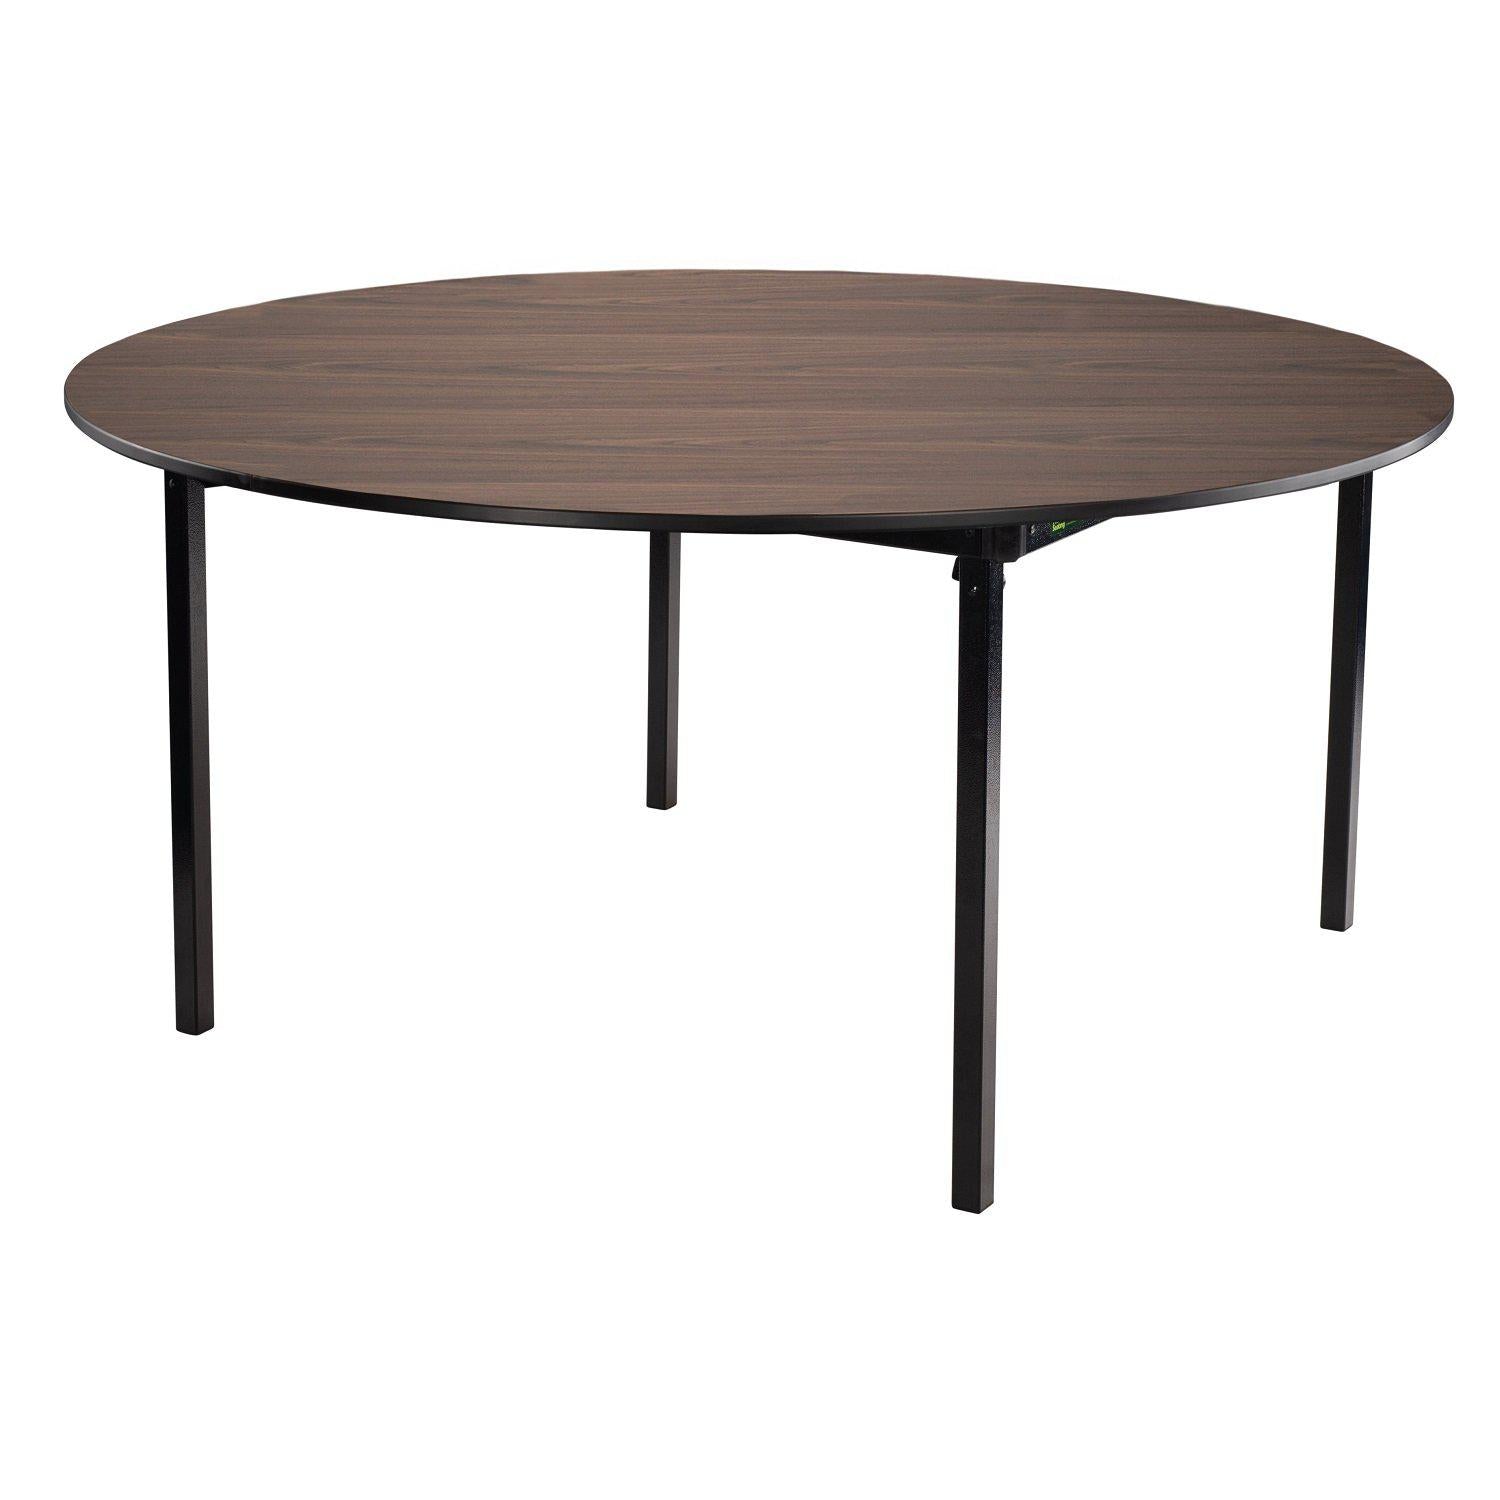 Max Seating Folding Table, 48" Round, Premium Plywood Core, High Pressure Laminate Top with PVC Edge Banding